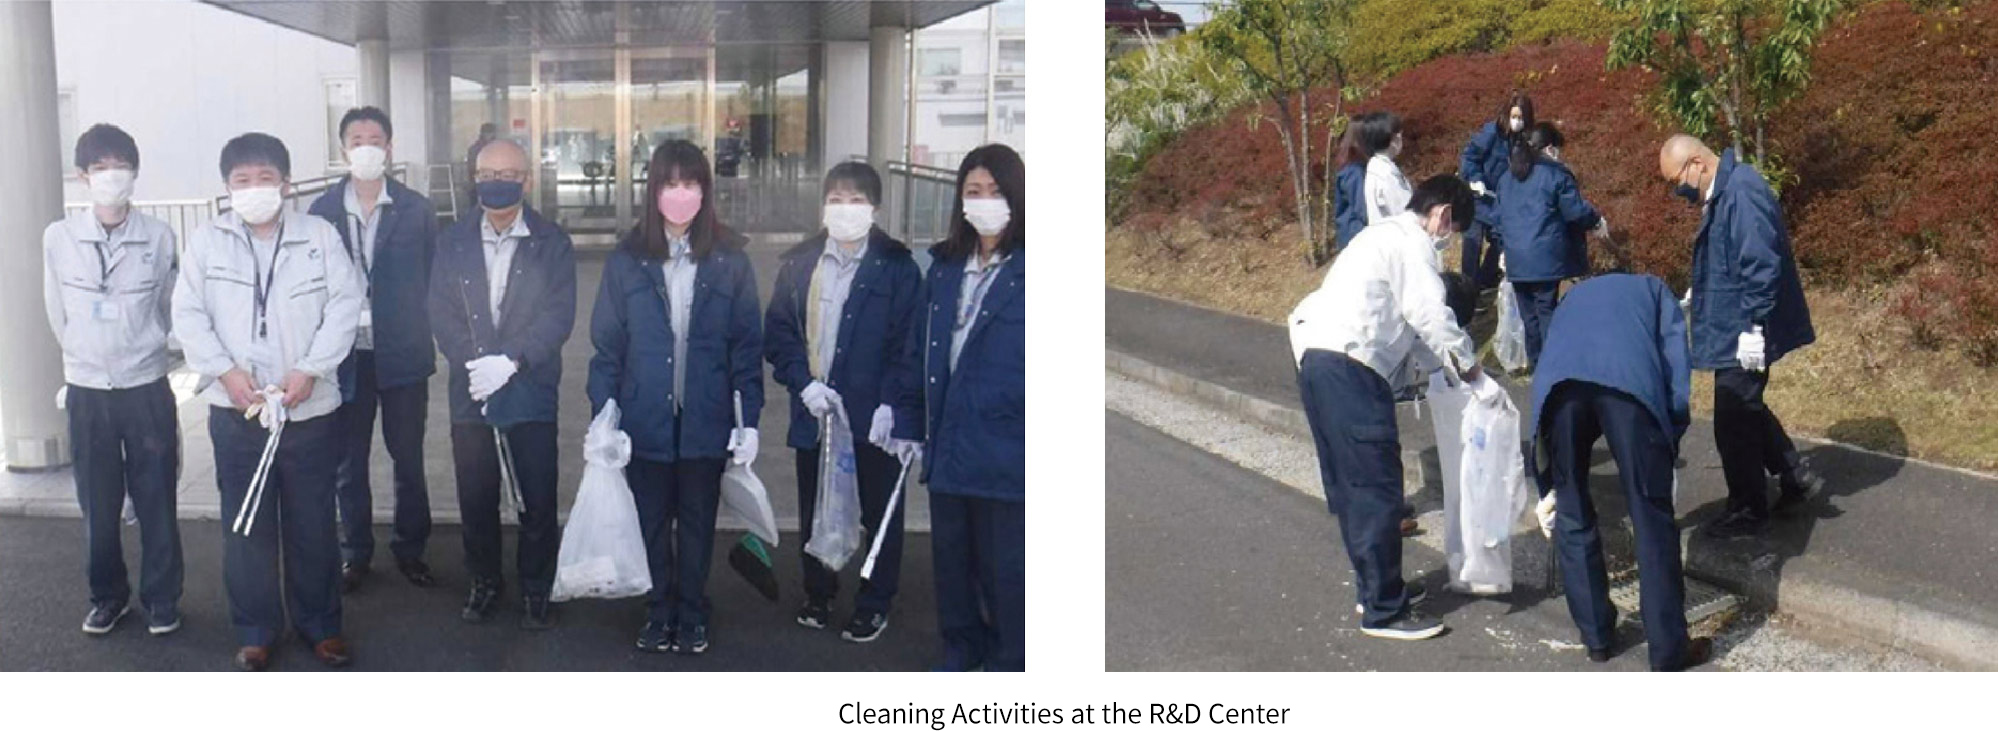 Cleaning Activities at the R&D Center